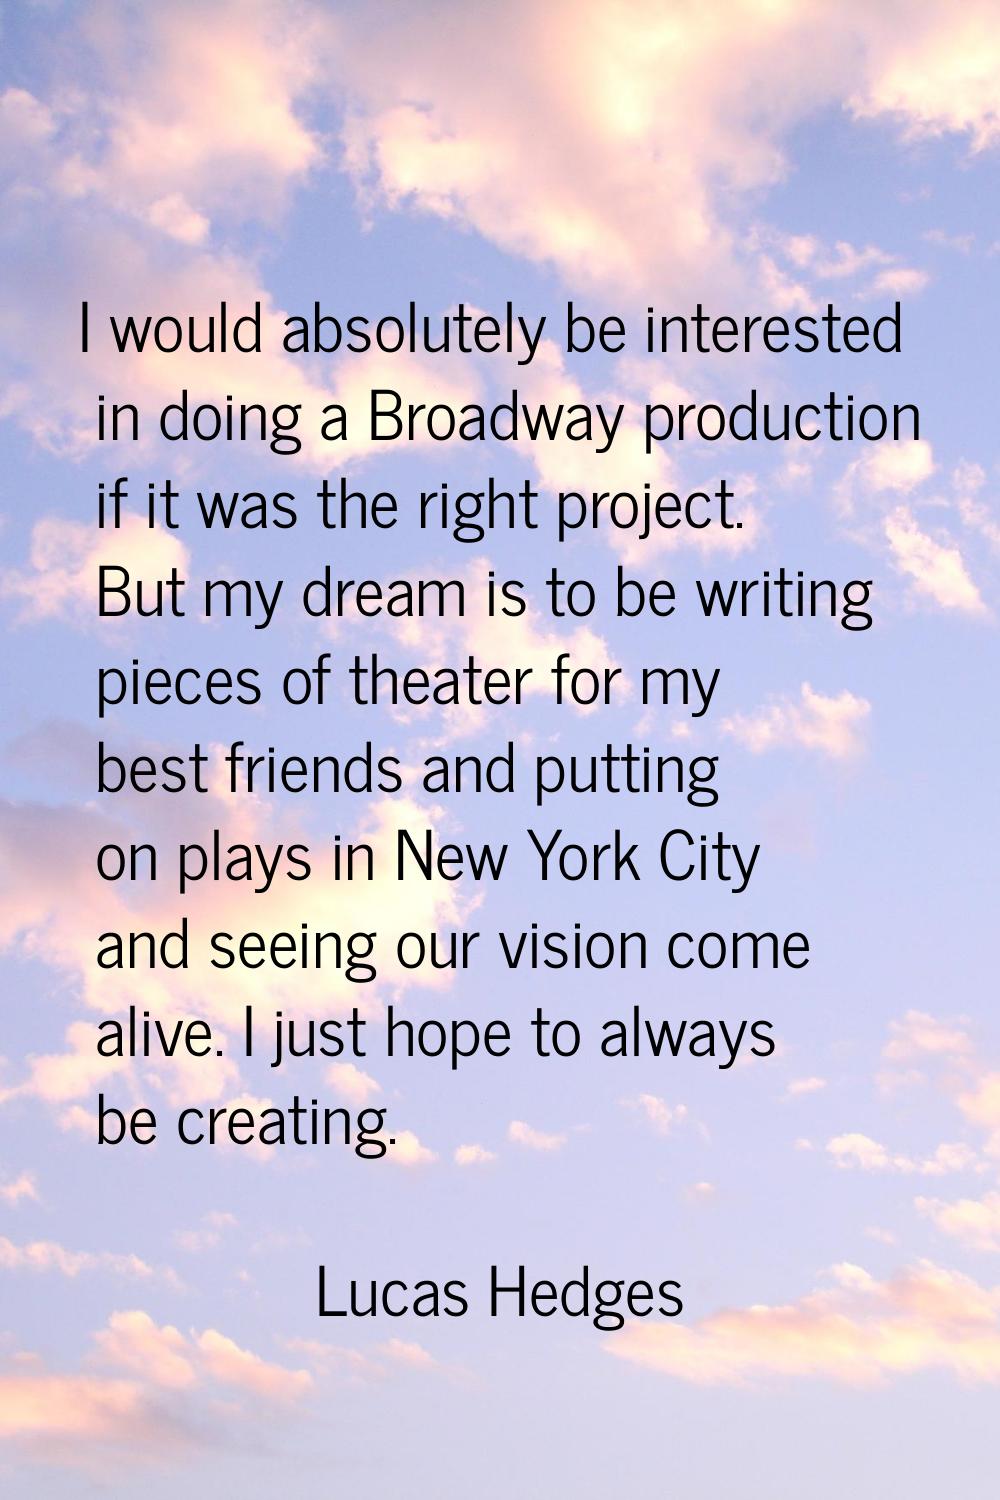 I would absolutely be interested in doing a Broadway production if it was the right project. But my